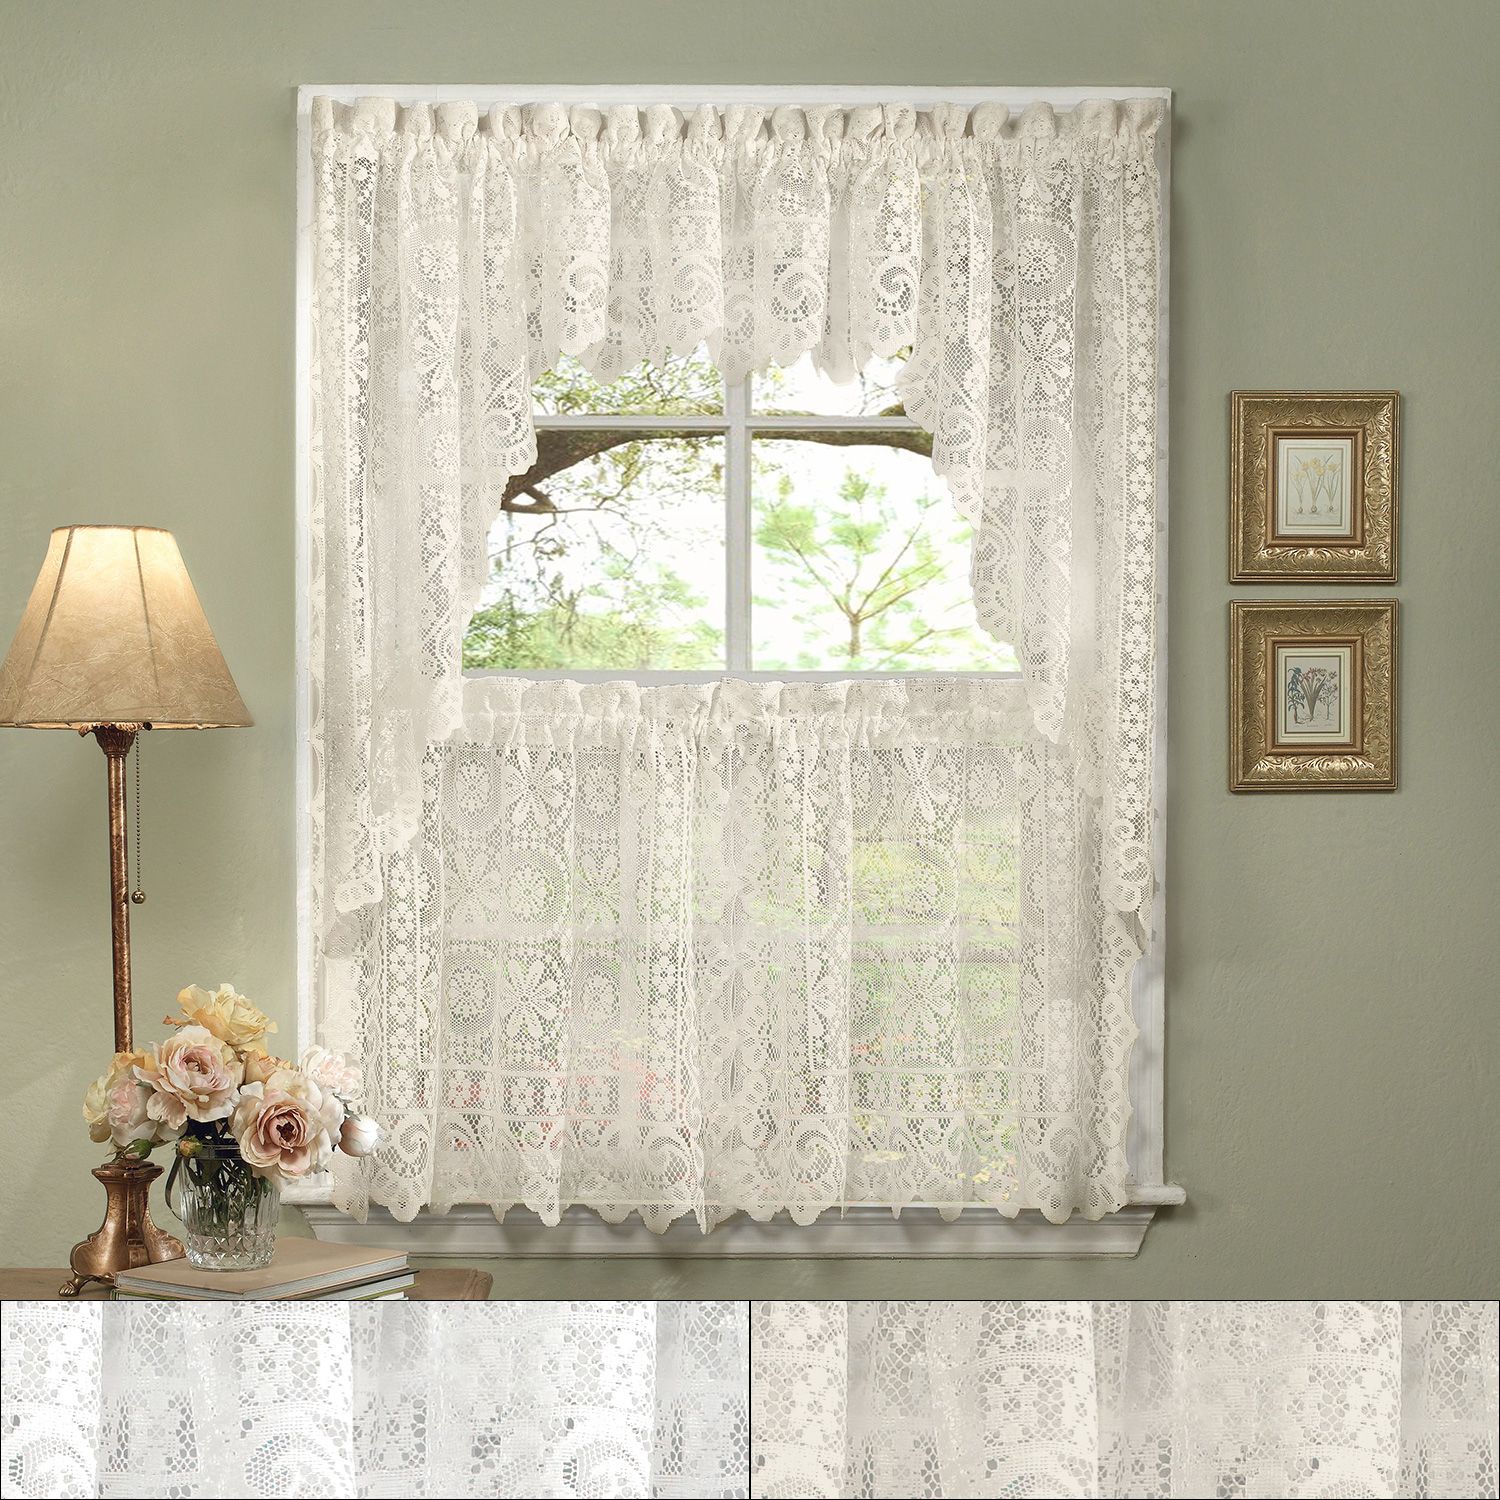 Details About Hopewell Heavy Lace Floral Kitchen Curtain 24" Tier Pair,  Valance & Swag Set Within Barnyard Window Curtain Tier Pair And Valance Sets (View 9 of 20)